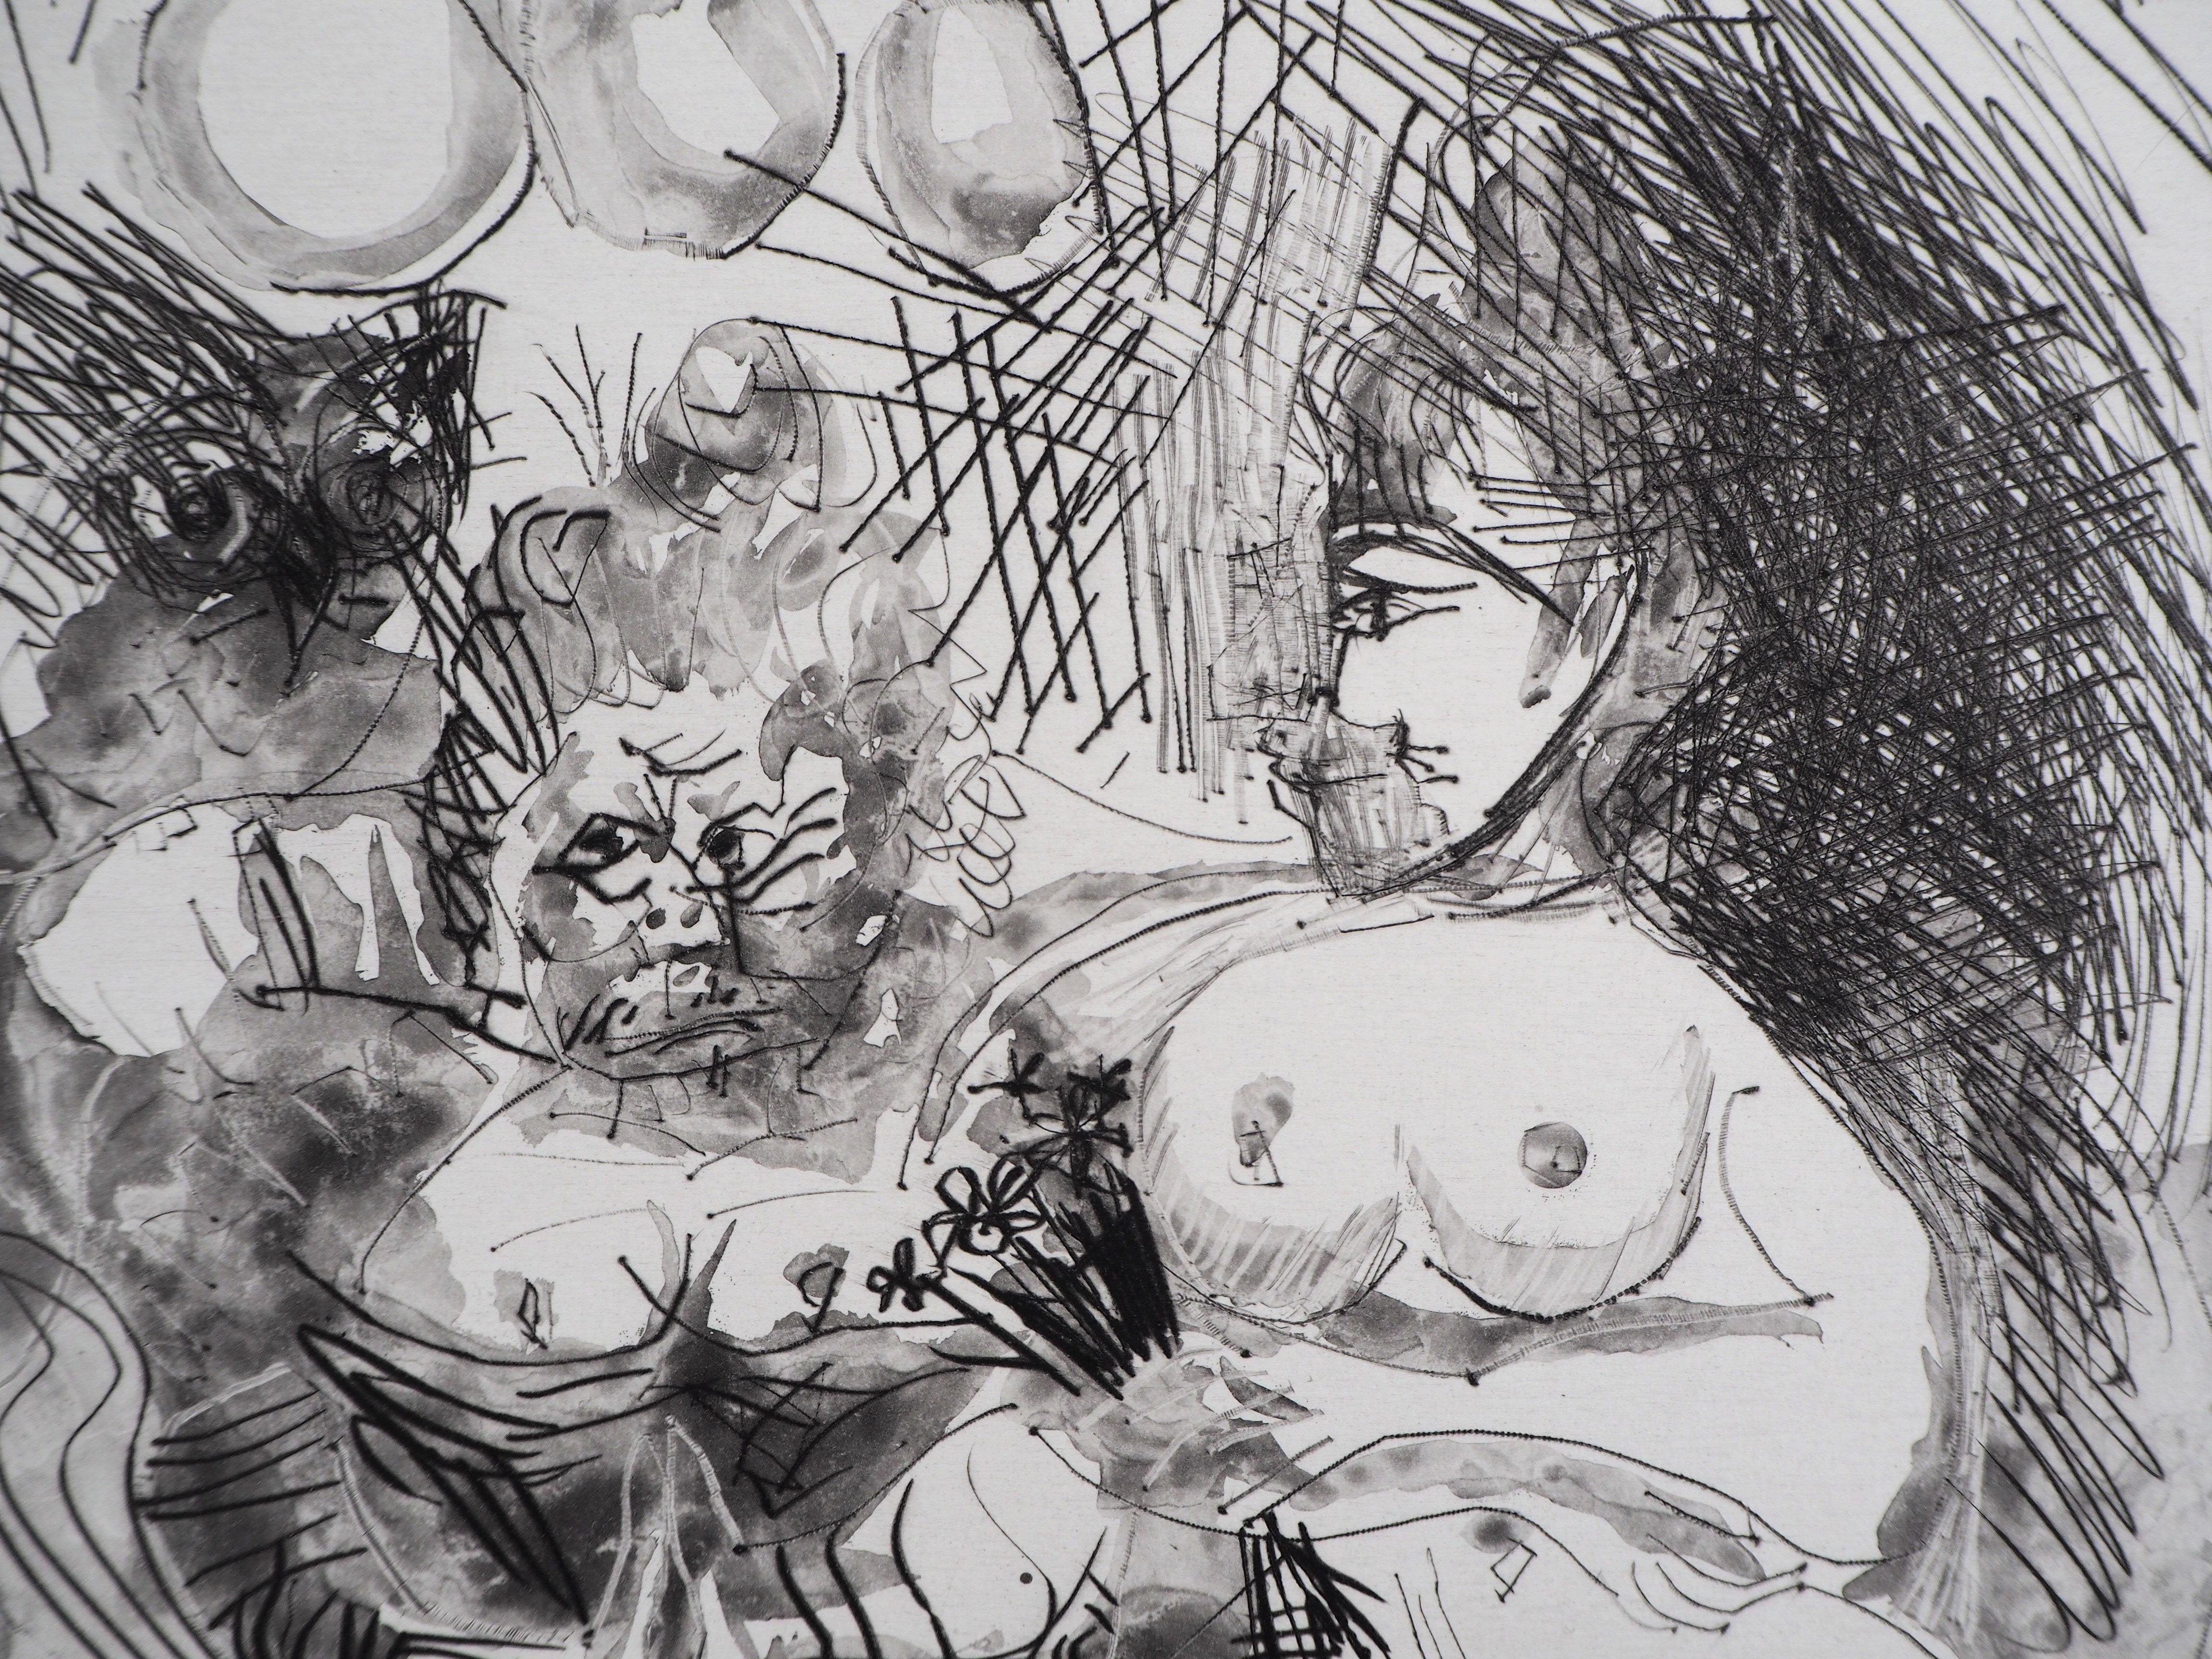 Tribute to Degas : Three Nudes - Original signed Etching - Limited to 50 copies - Cubist Print by Pablo Picasso